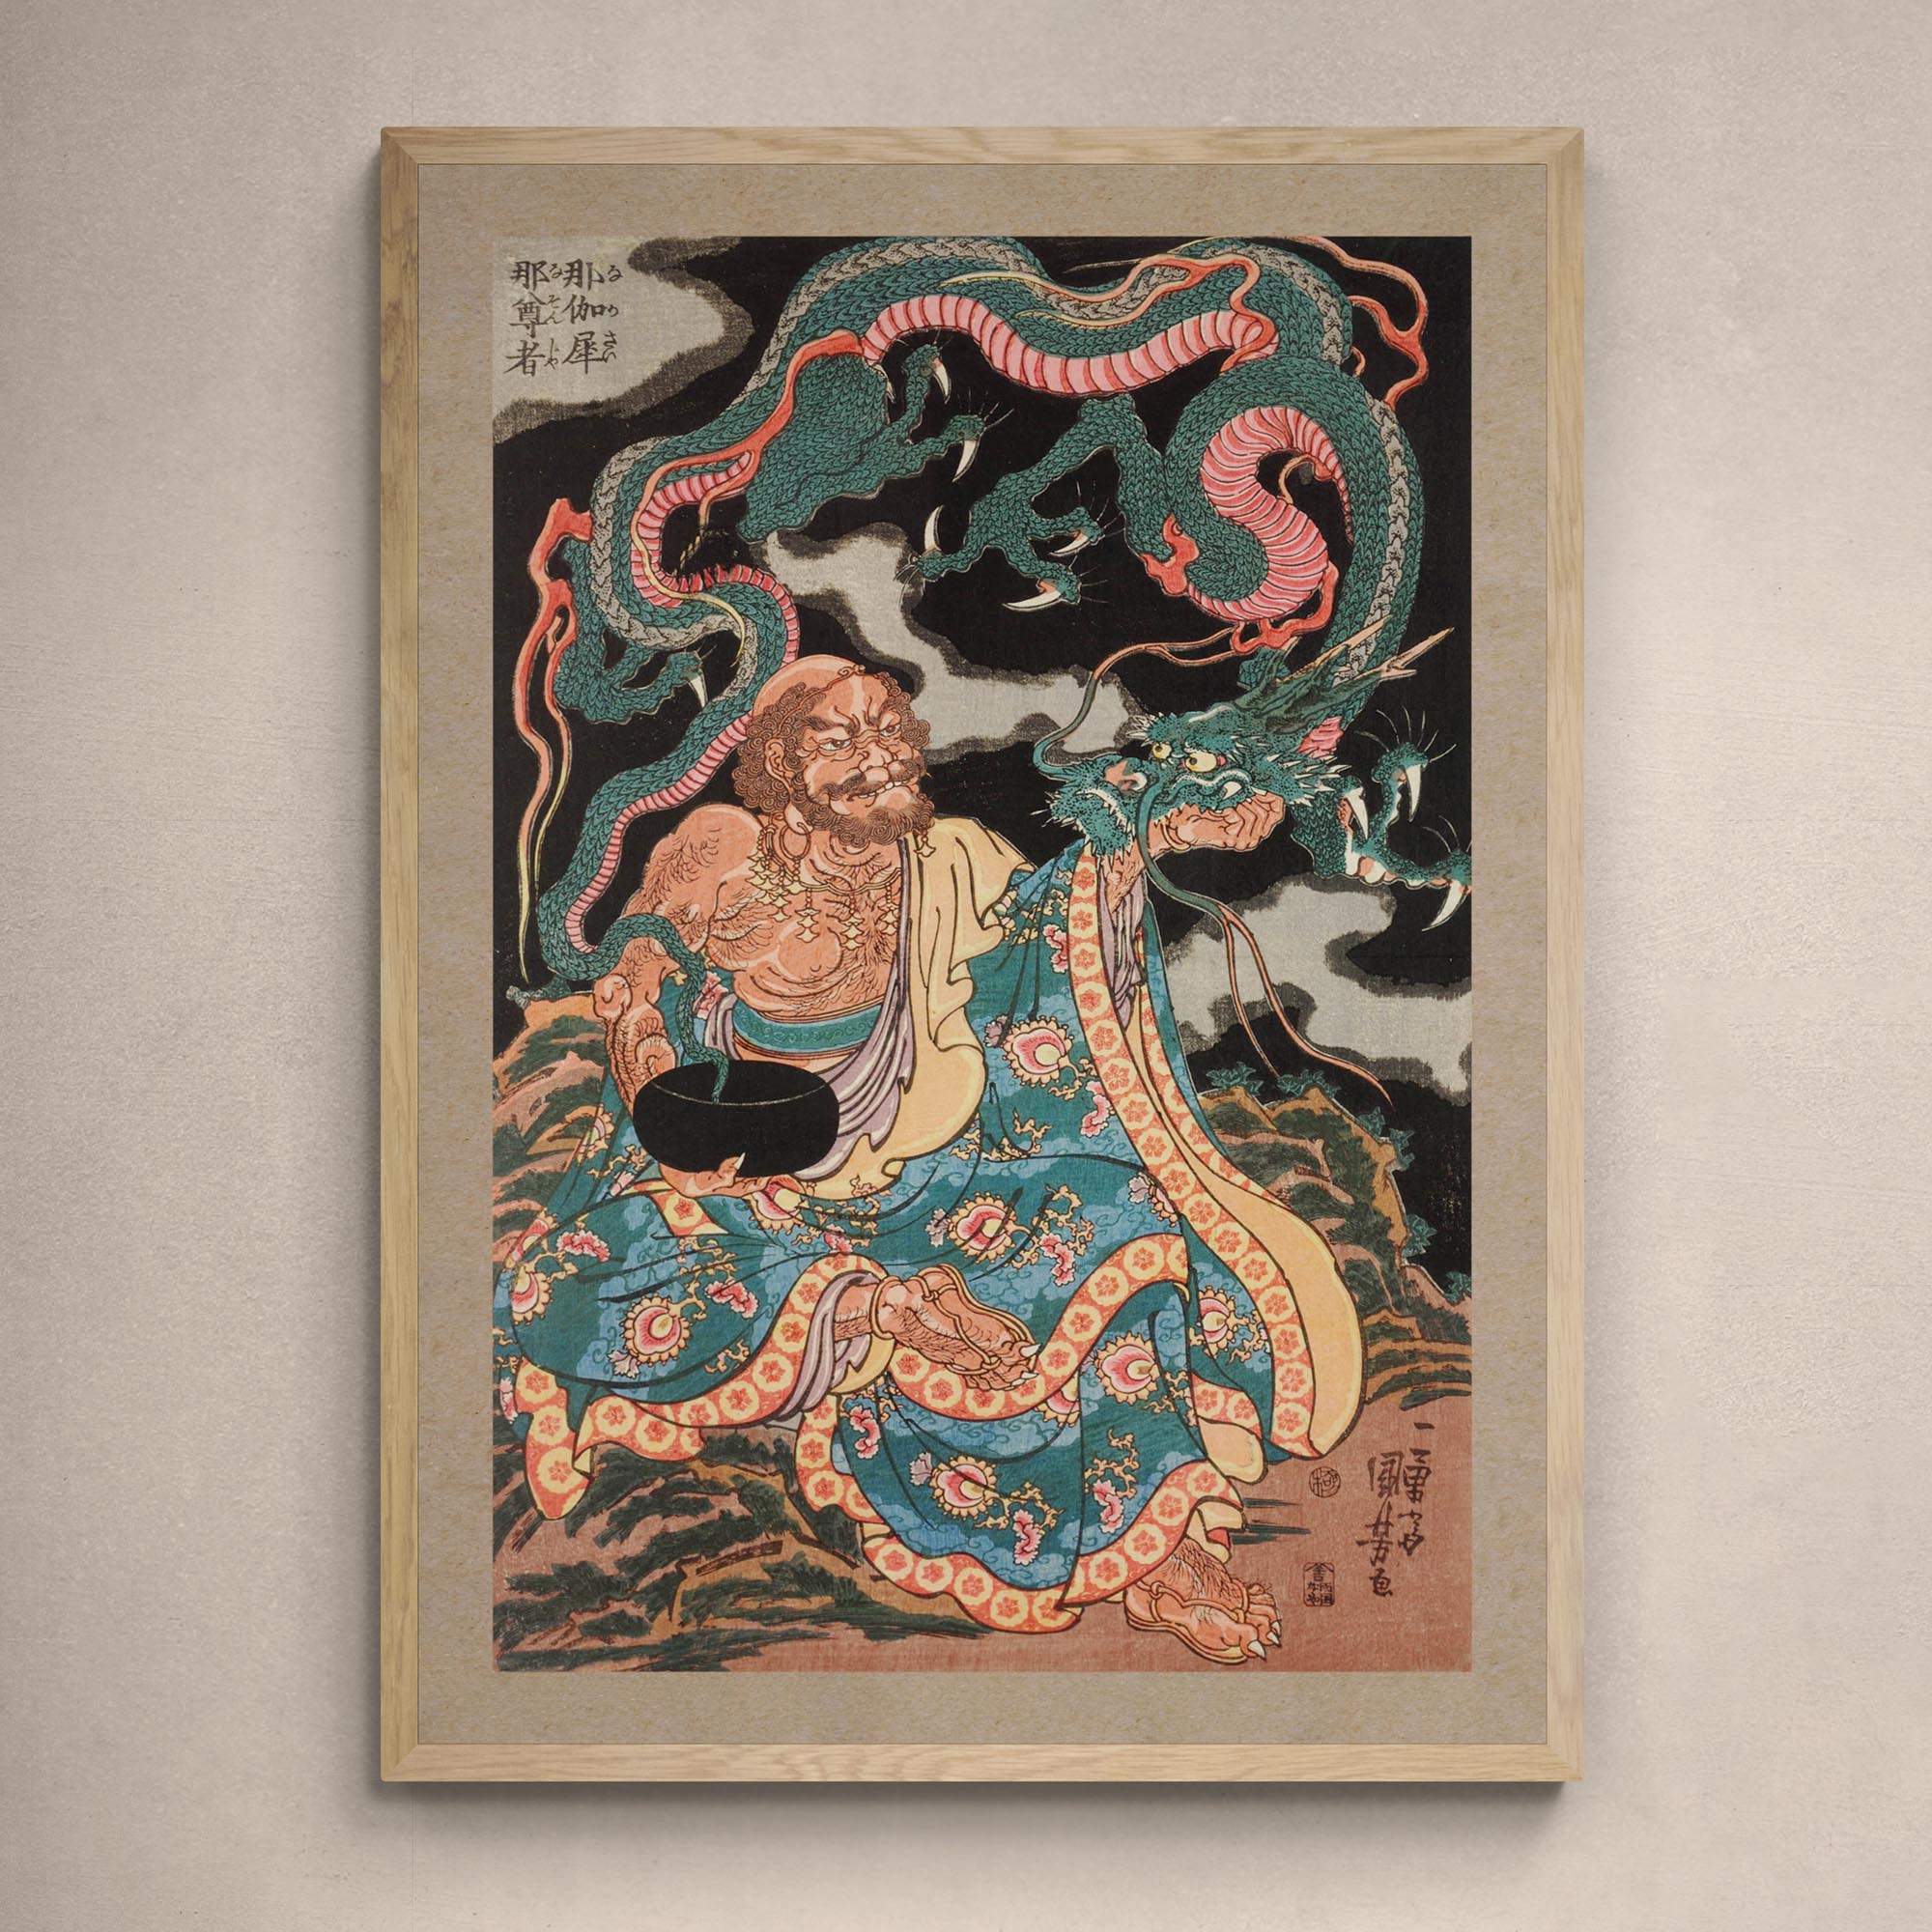 Framed Print 6"x8" / Natural Frame The Arhat Nakasaina Sonja Seated On a Rock, with a Dragon Emerging From His Bowl, Vintage Buddhist Japanese Framed Art Print